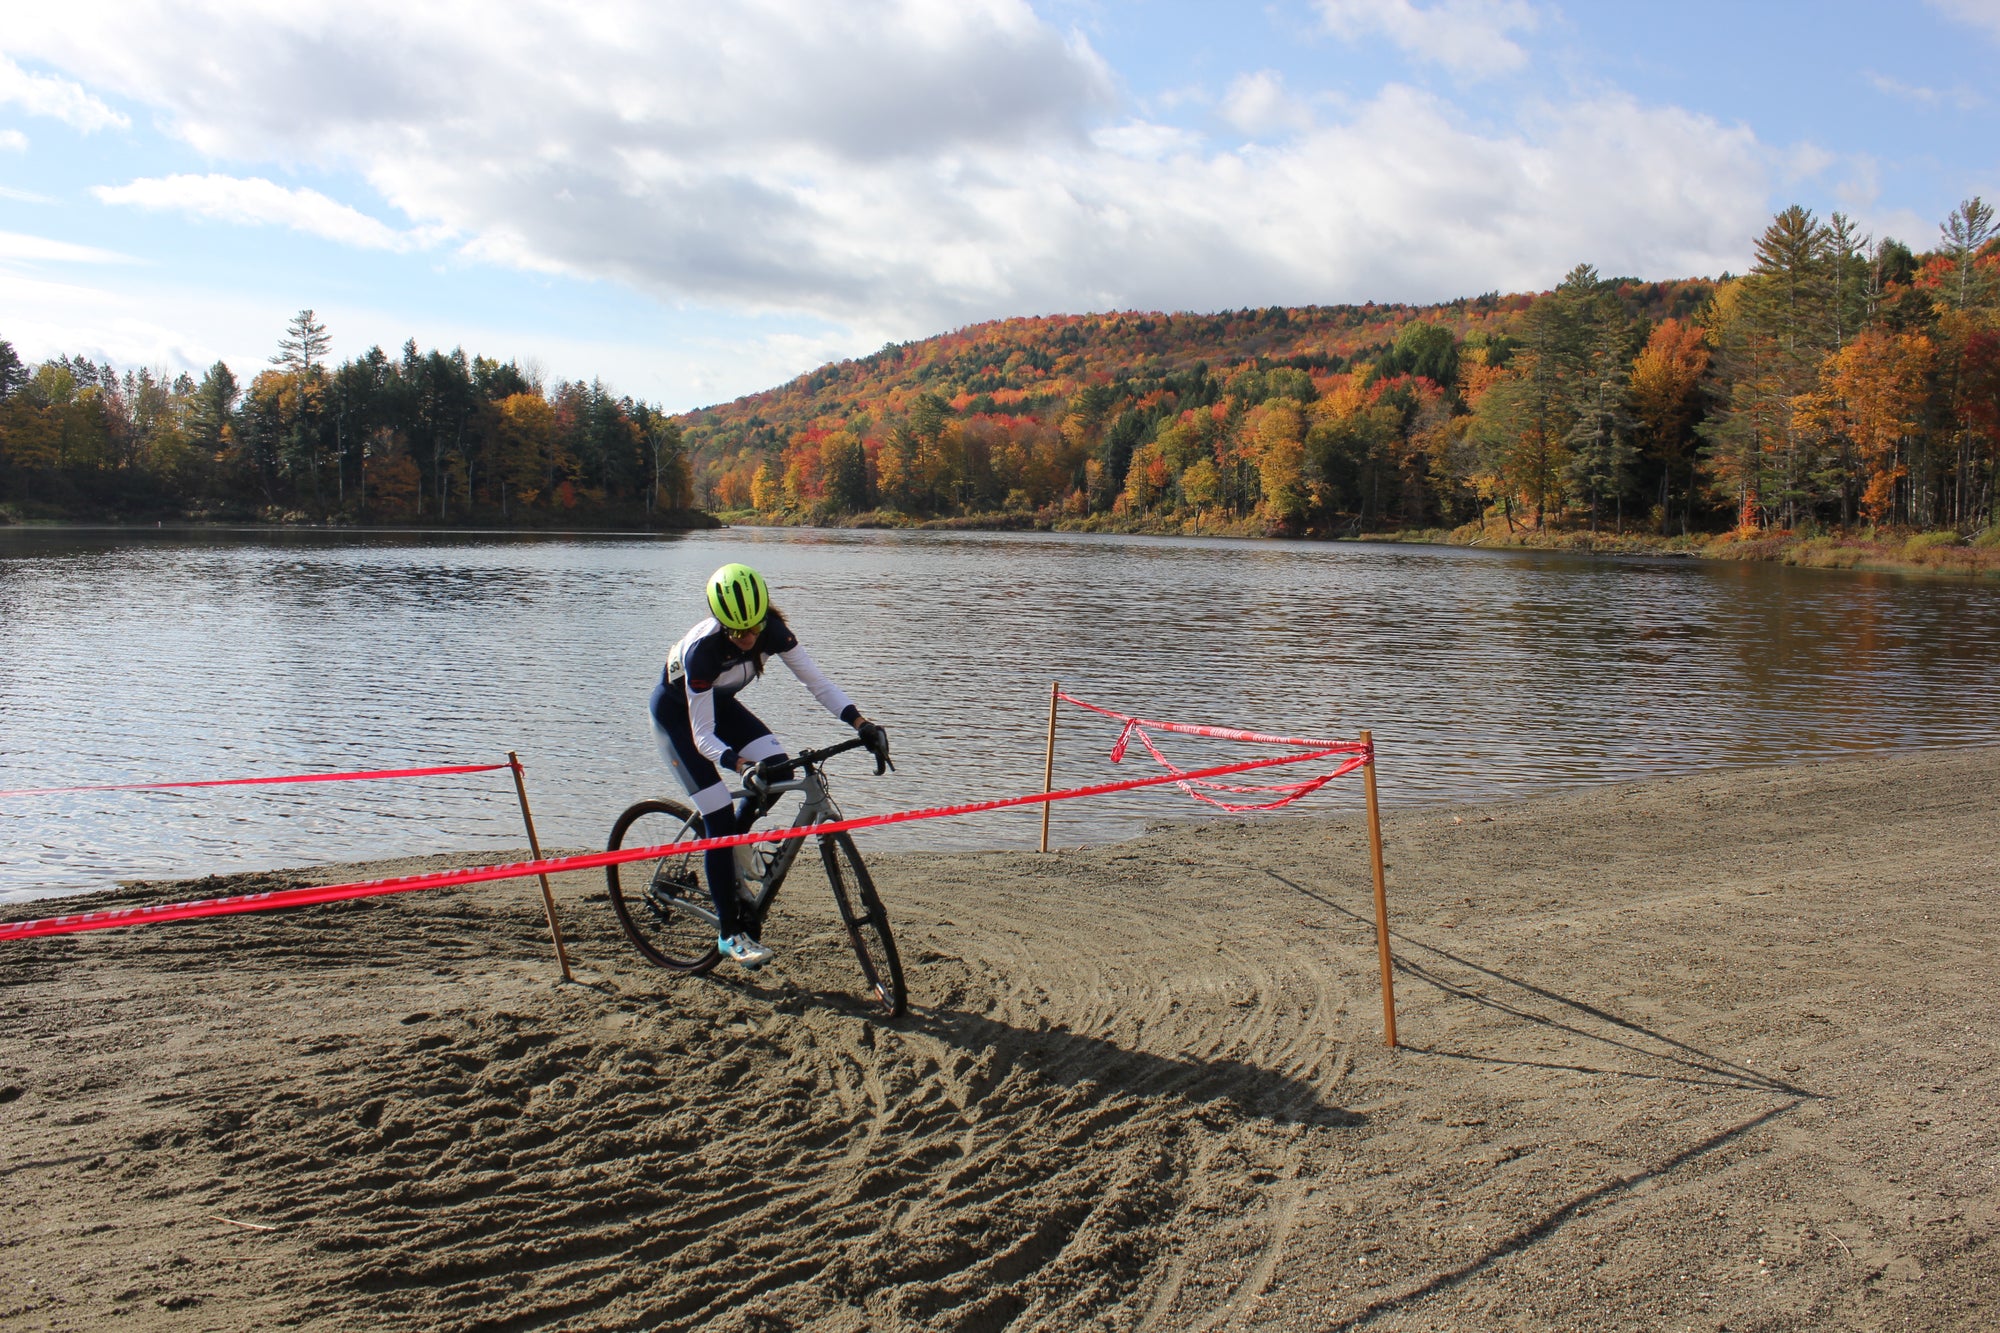 A bike rider racing cyclocross on a beach with a lake behind them